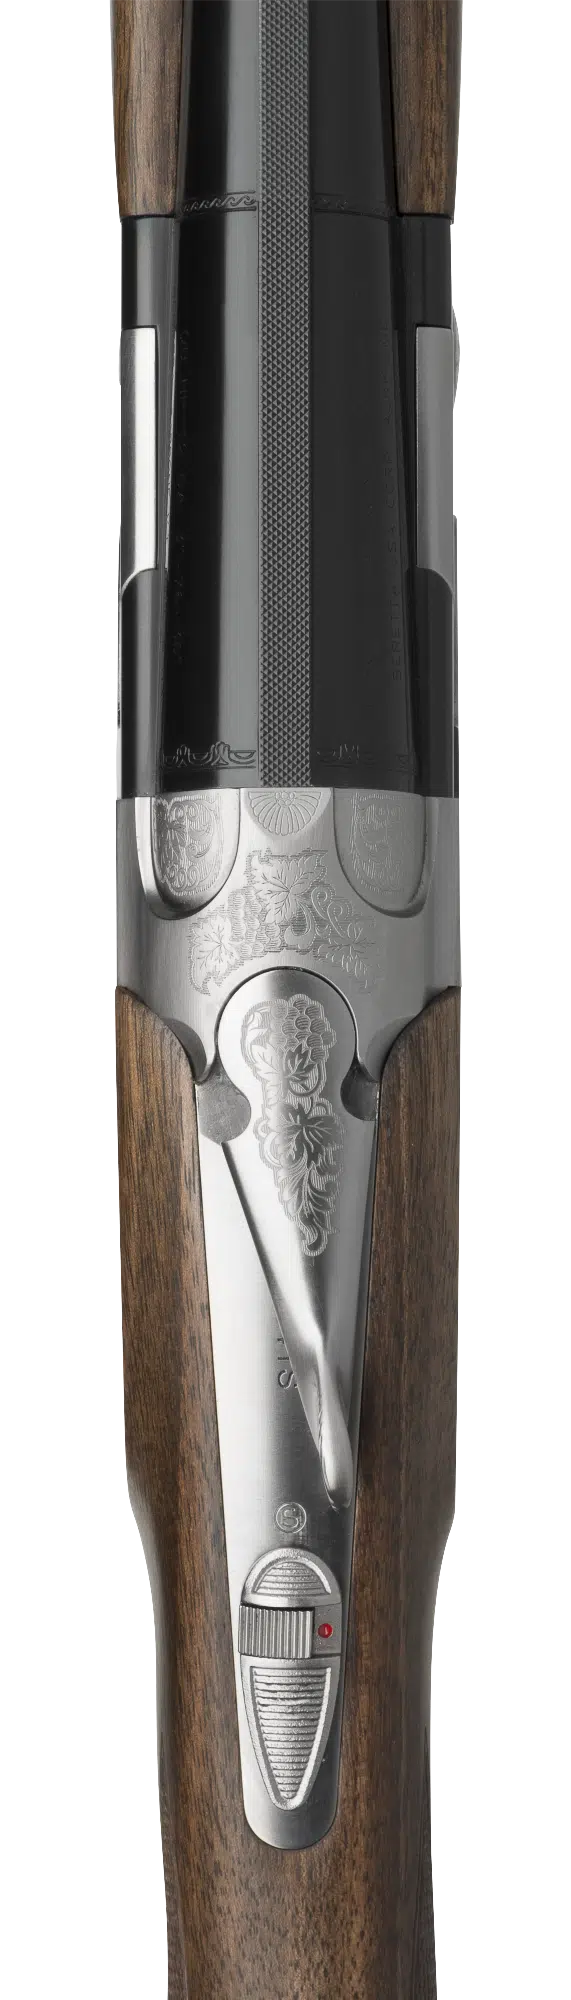 BERETTA - 686 SILVER PIGEON - SPORTING - ADJUSTABLE COMB - 30" - IN STORE NOW